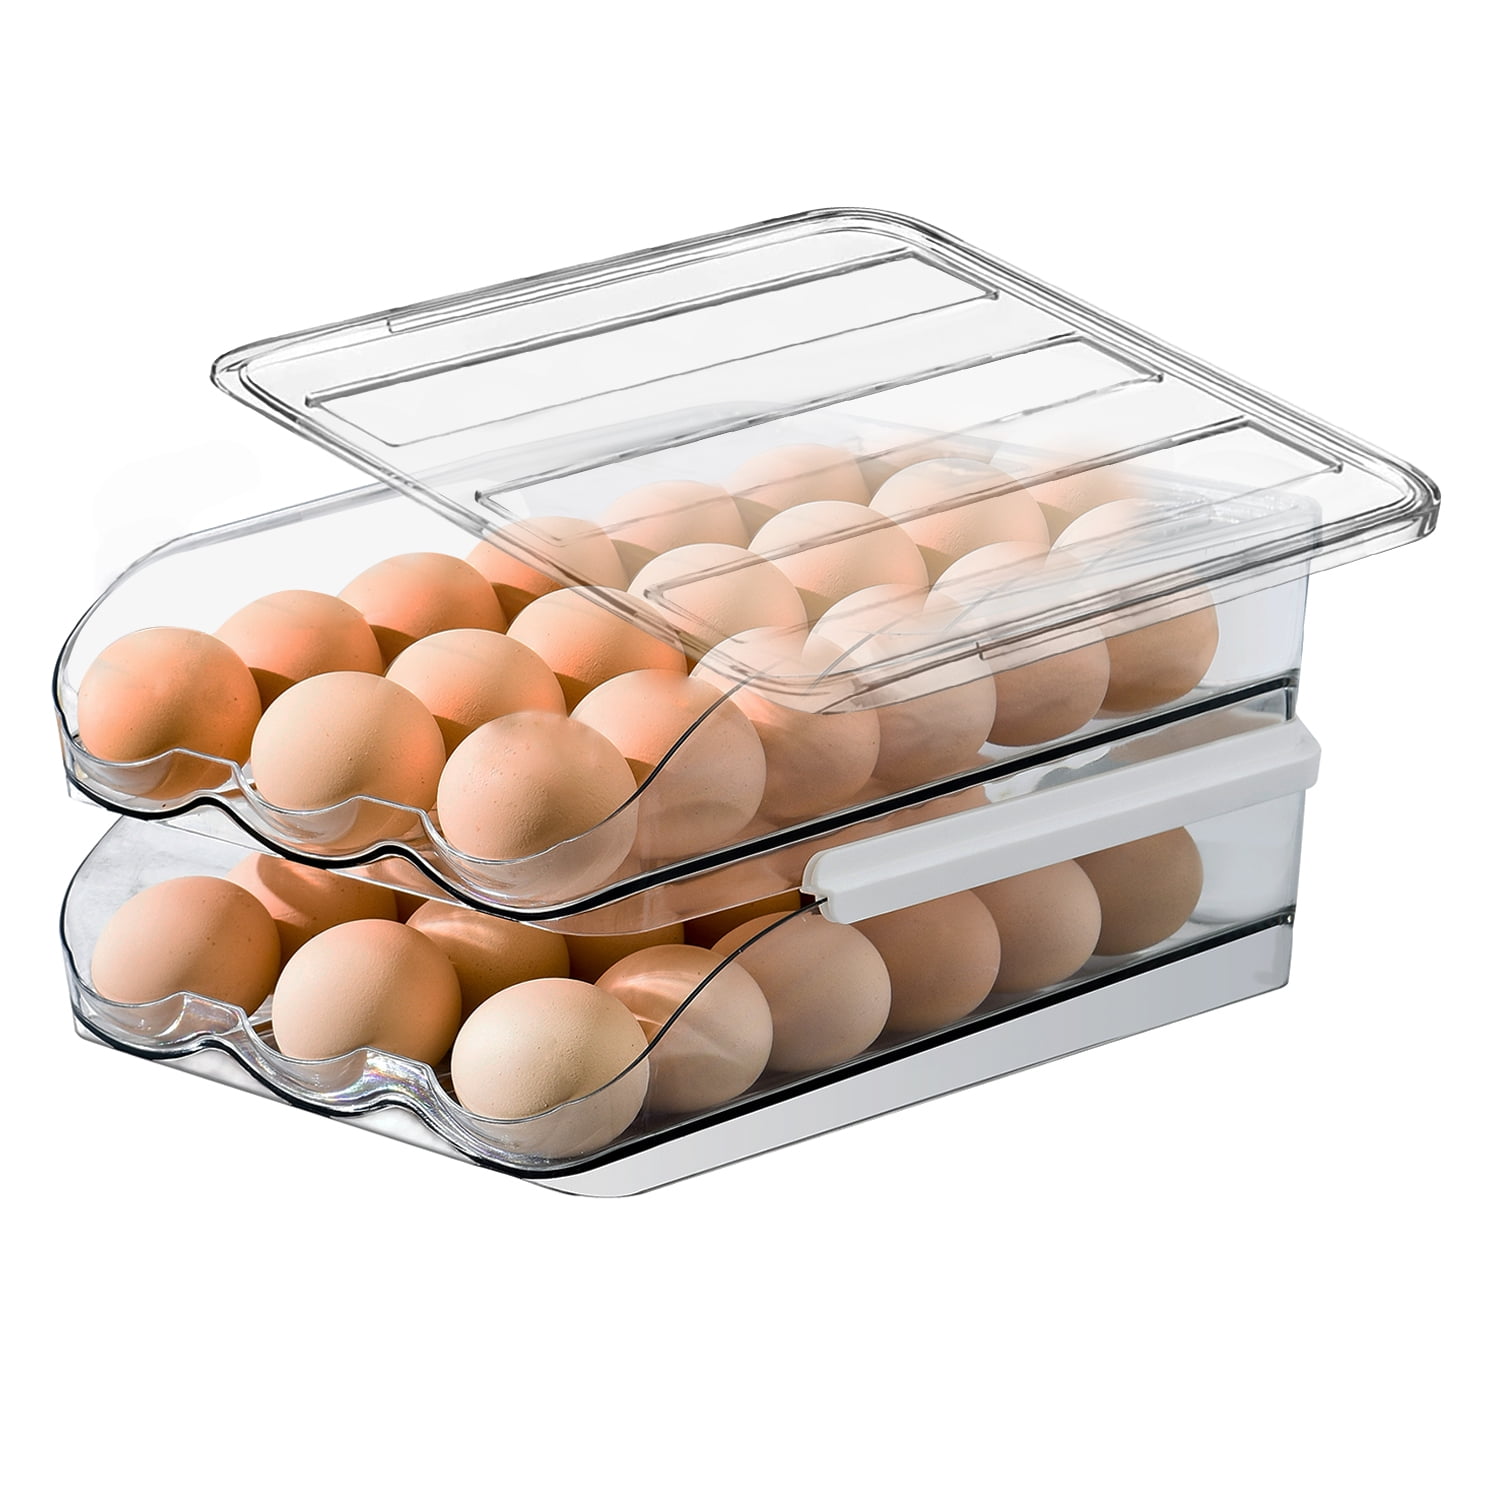 20 Grid 2layer Stackable Egg Holder For Refrigerator Drawer Pull Out, Clear Egg  Container Fridge Storage Box Plastic(m)